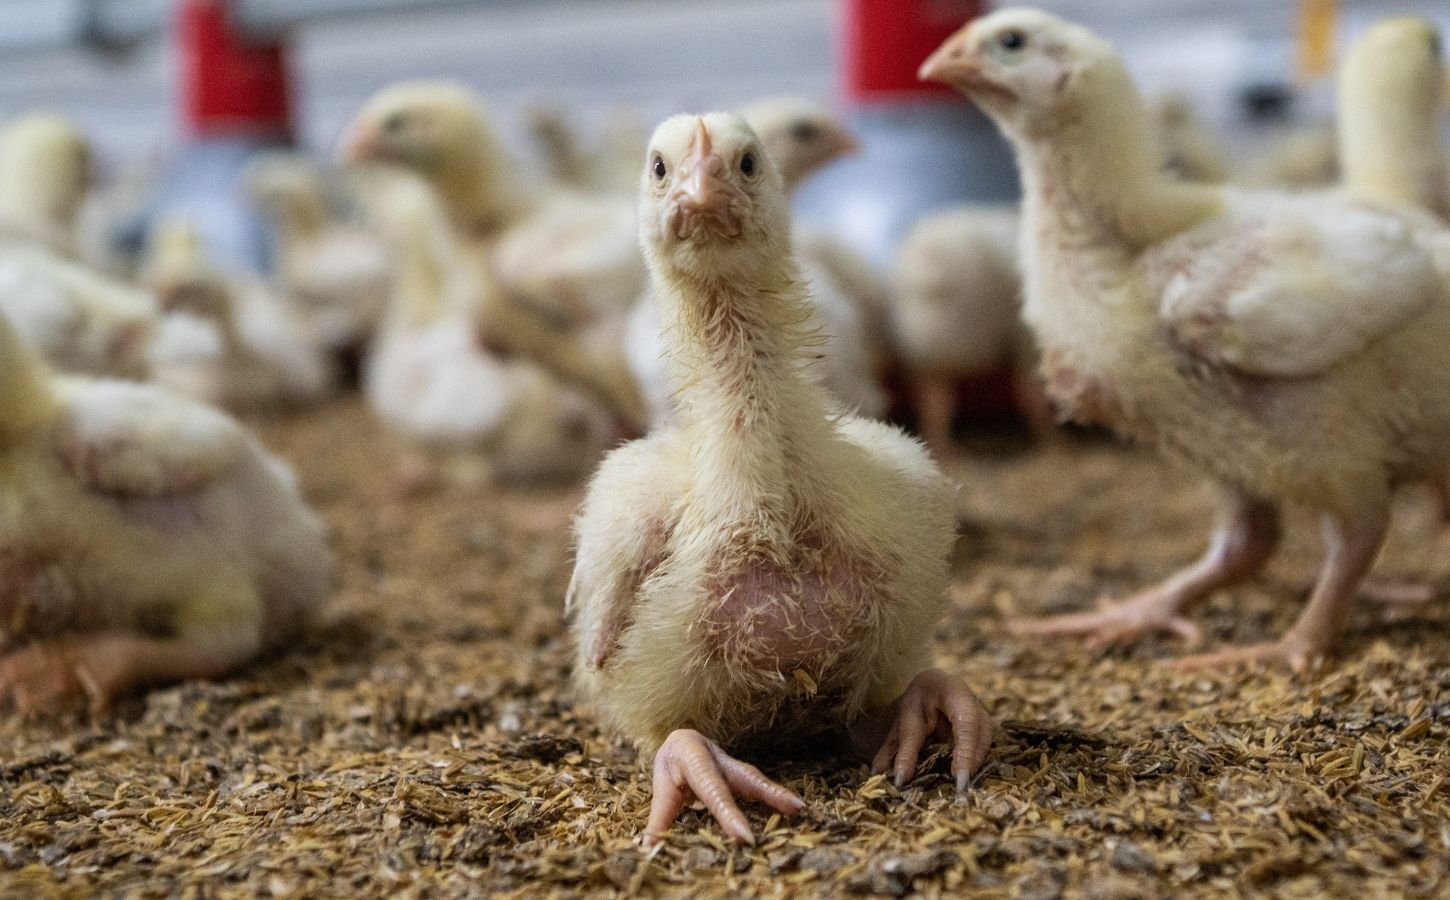 The UK is being taken to court over the size of its chickens